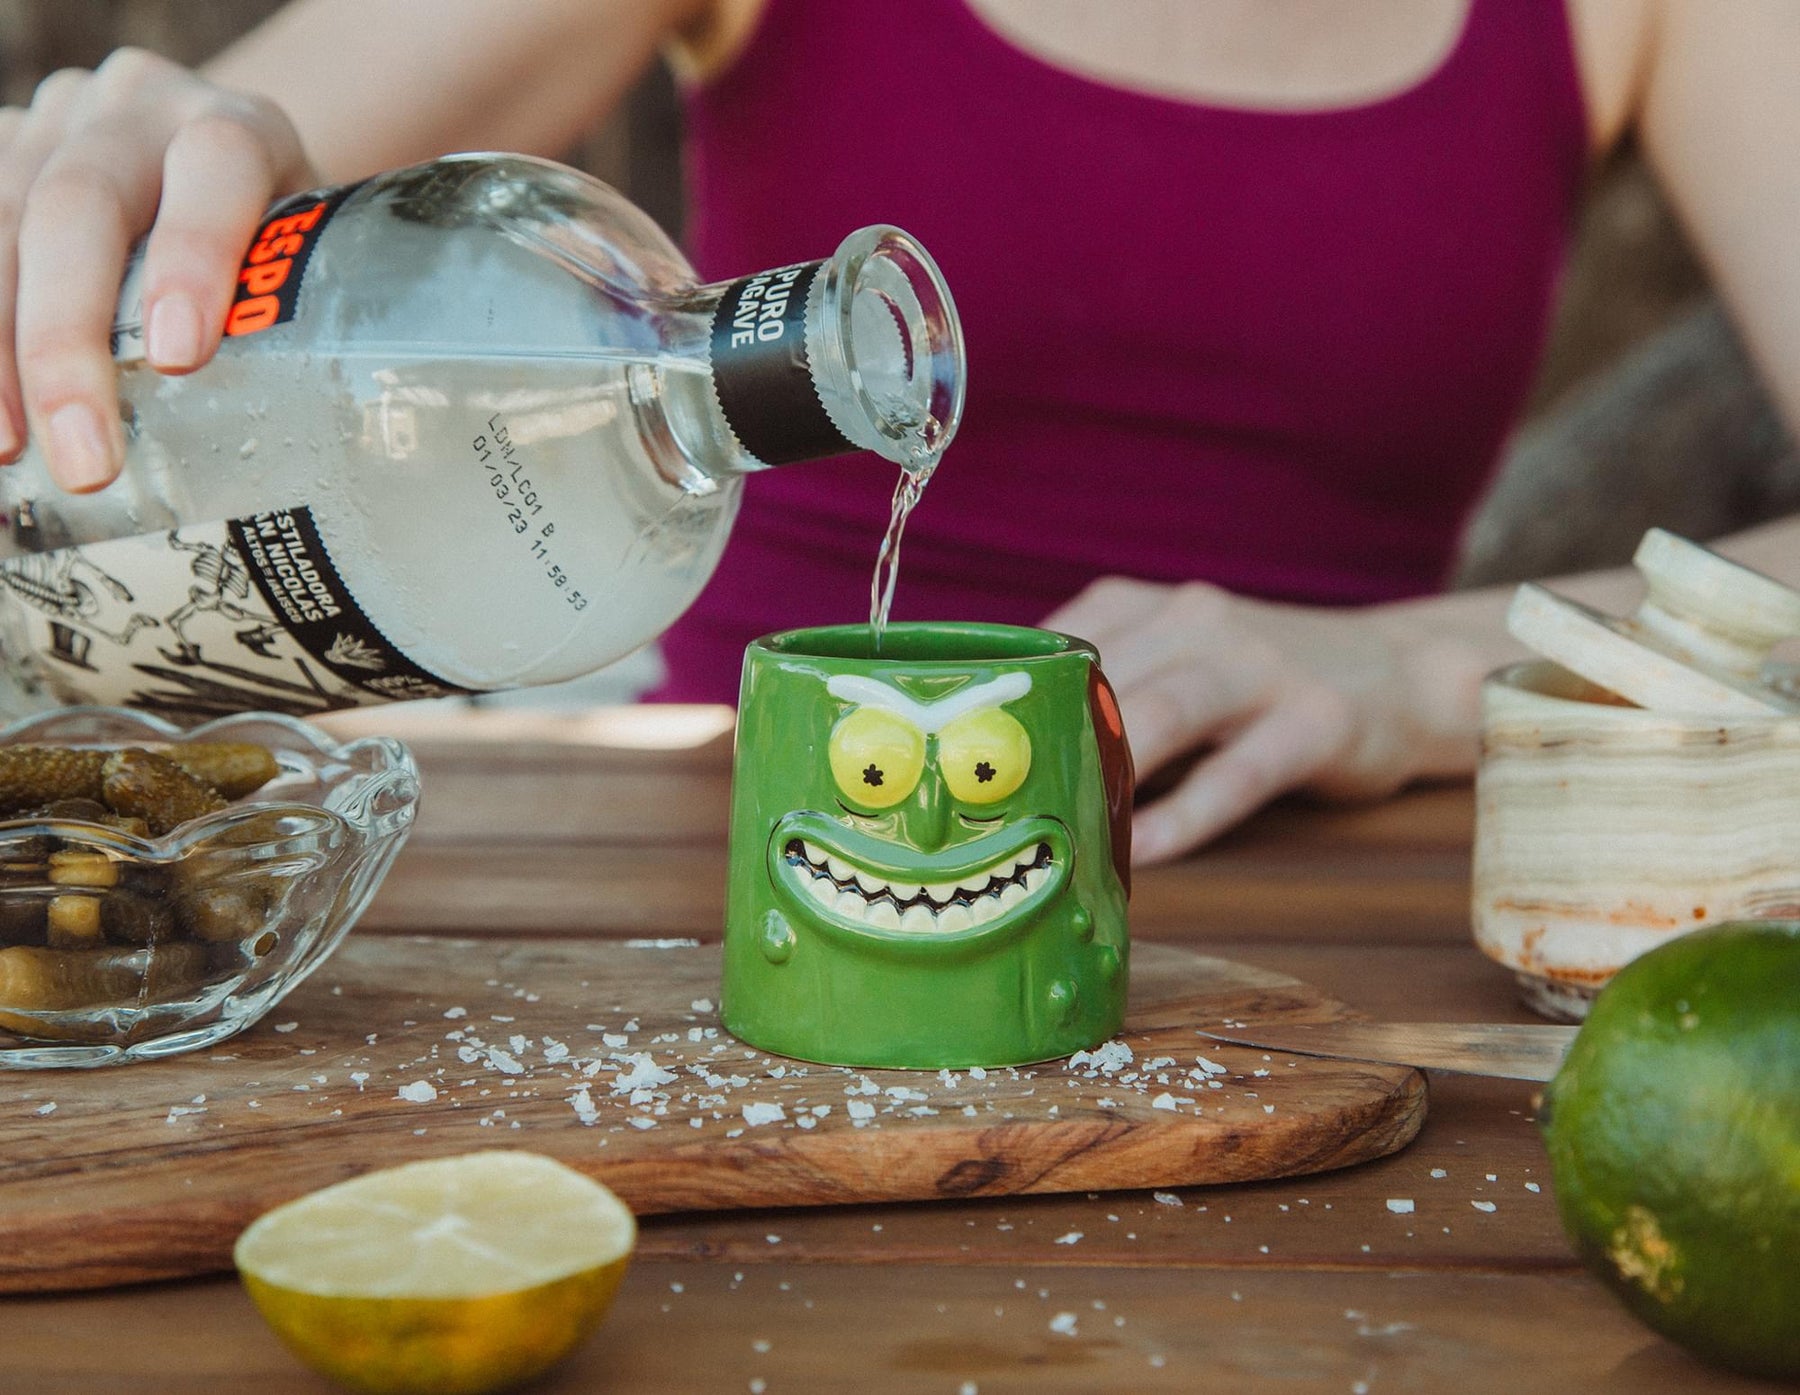 Rick and Morty Pickle Rick Sculpted Ceramic Mini Shot Glass | Holds 2 Ounces